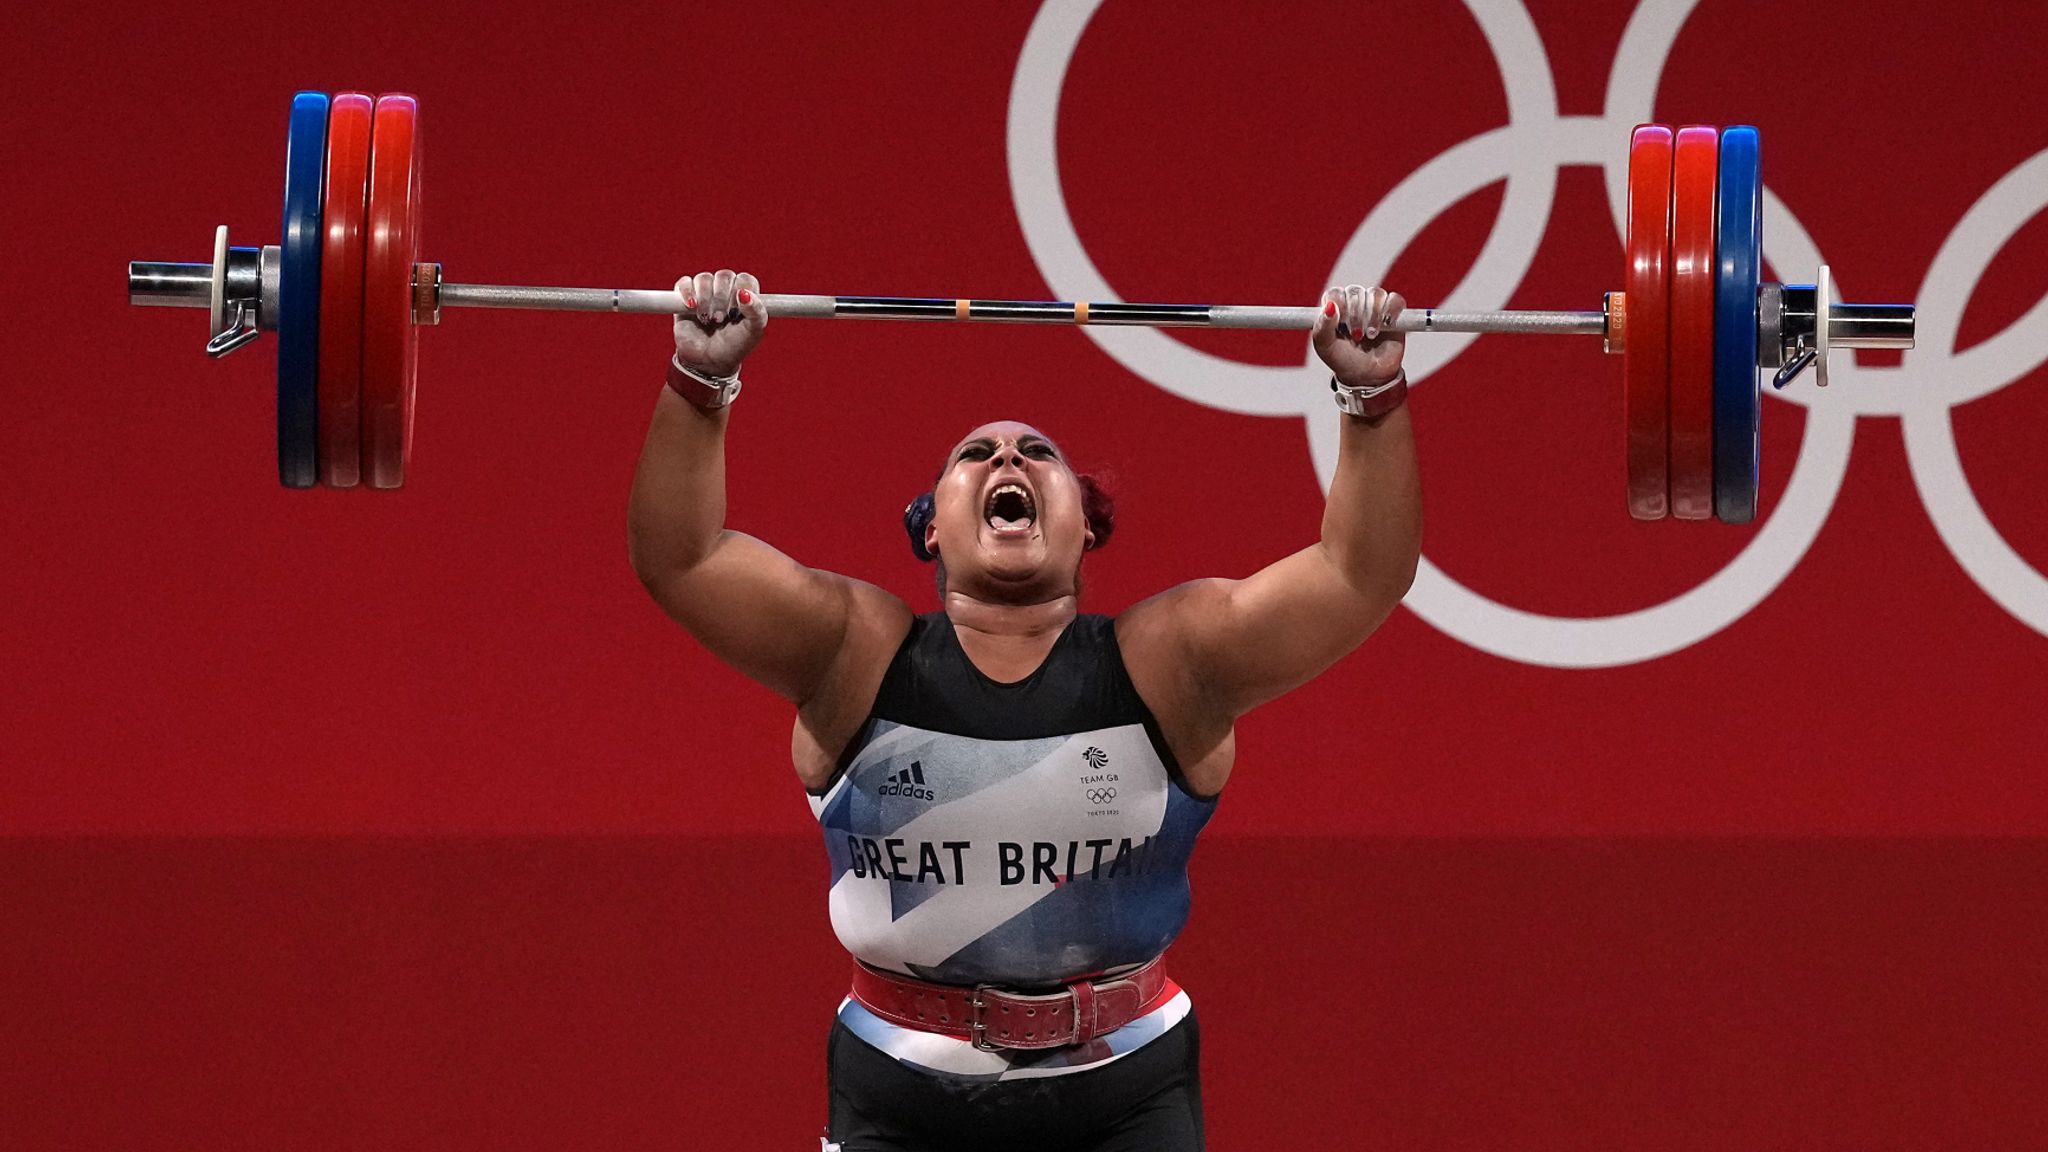 Britain's Emily Campbell wins historic Olympics weightlifting